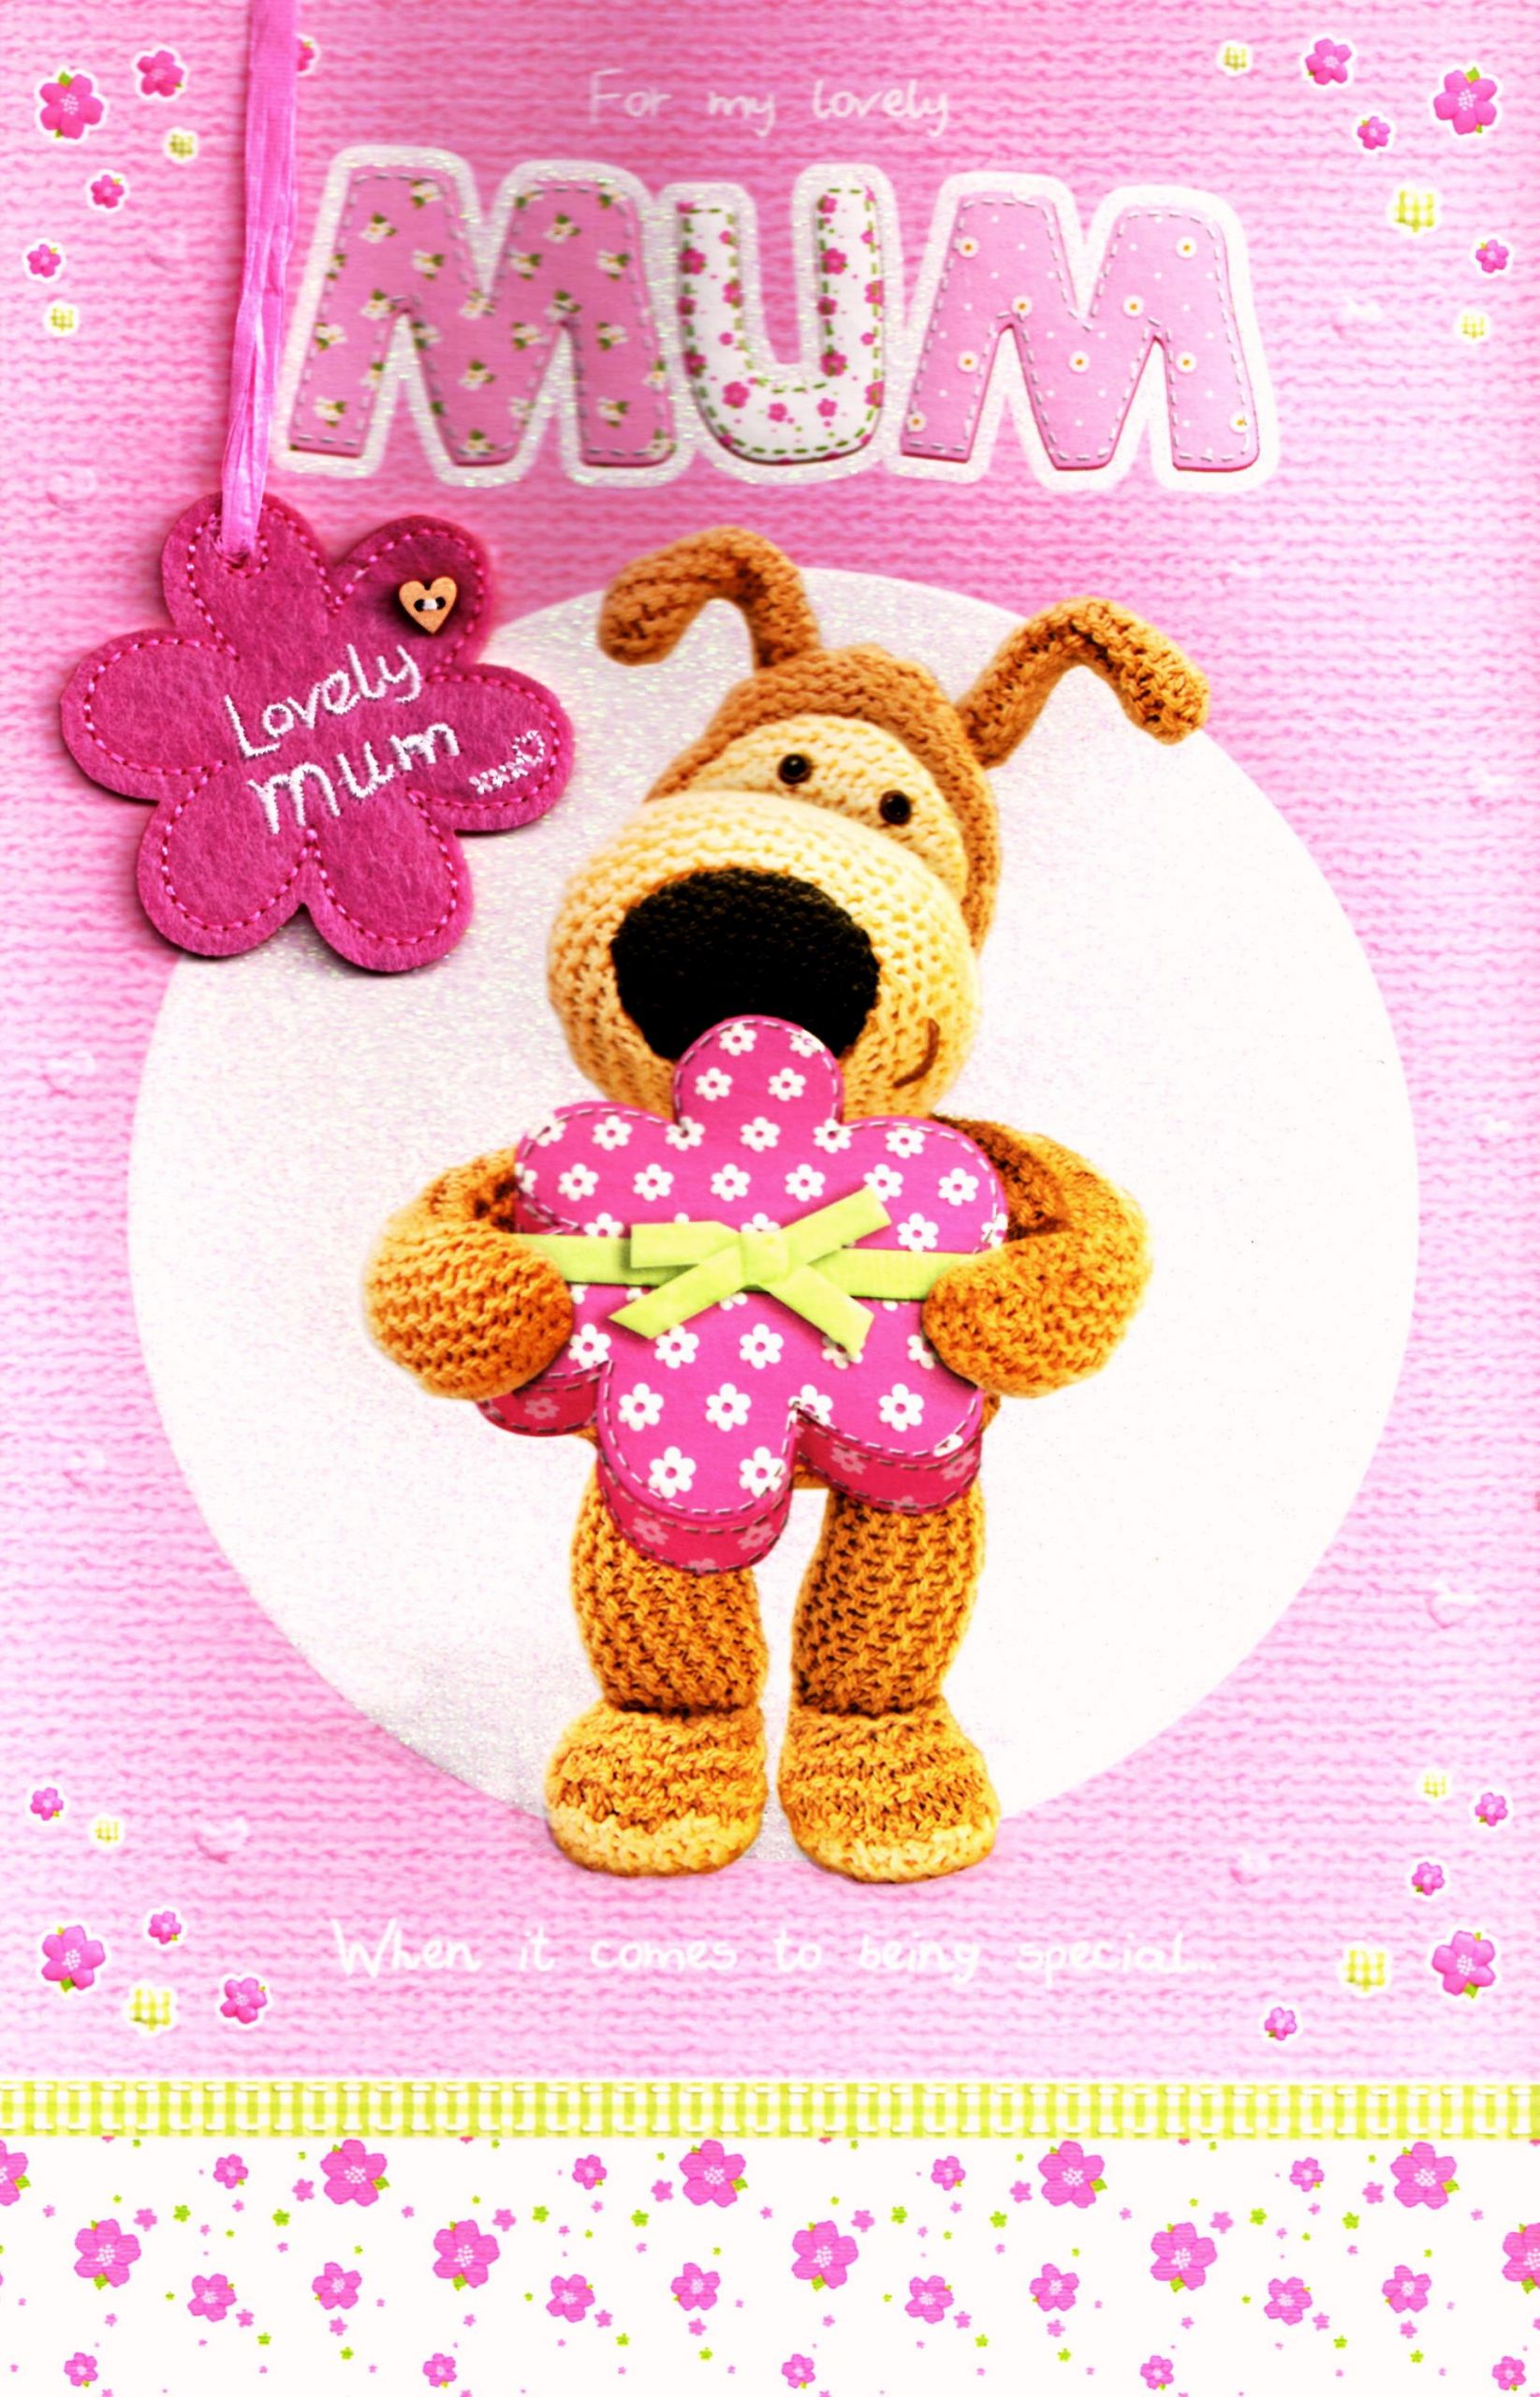 Mother's Day Quotes For Mom
 Boofle For My Lovely Mum Happy Mother s Day Card